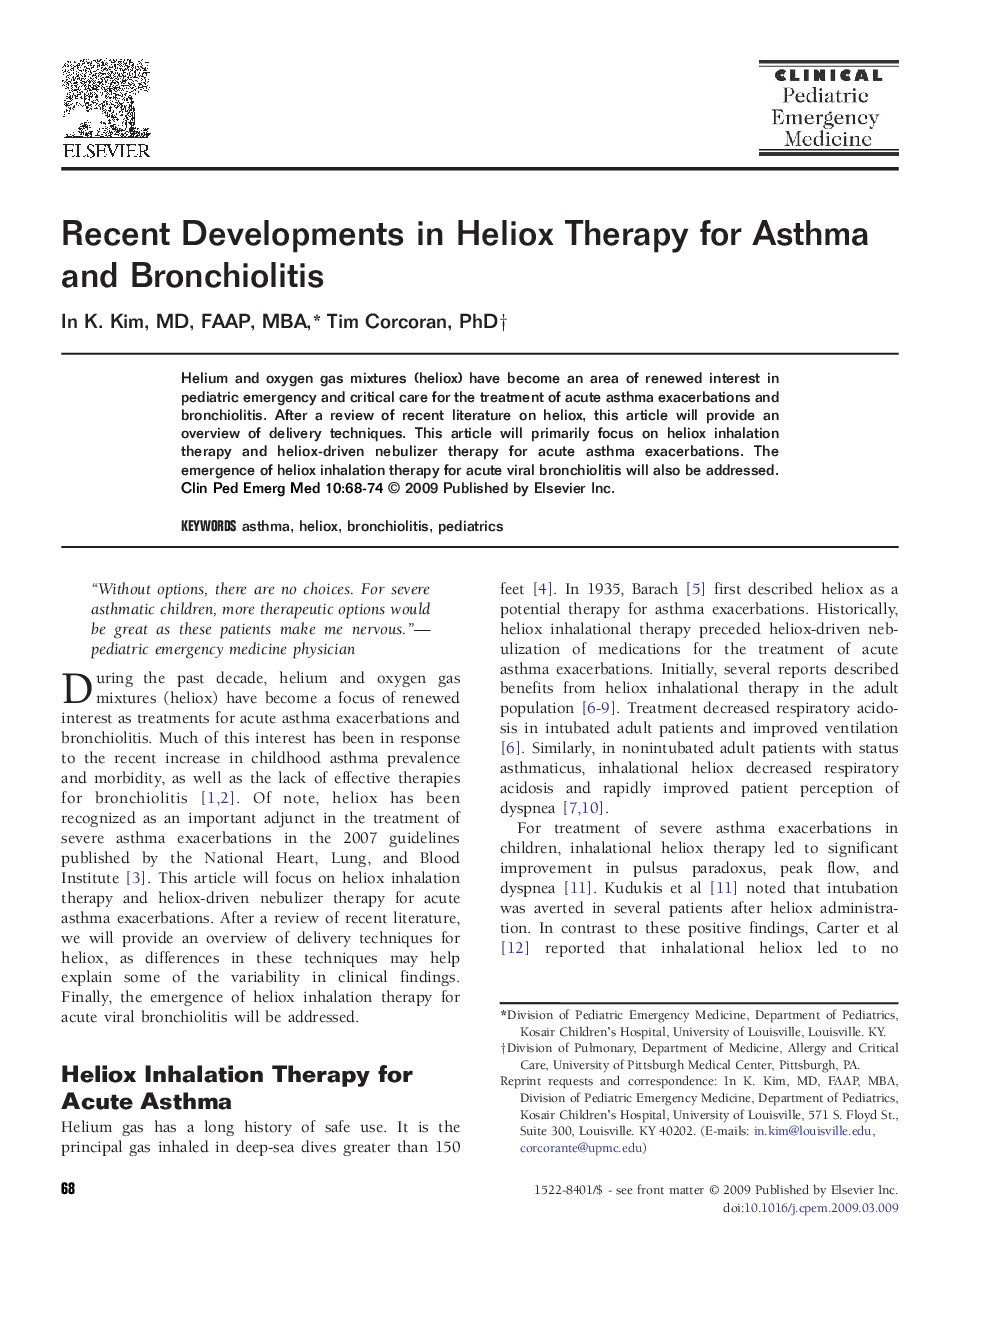 Recent Developments in Heliox Therapy for Asthma and Bronchiolitis